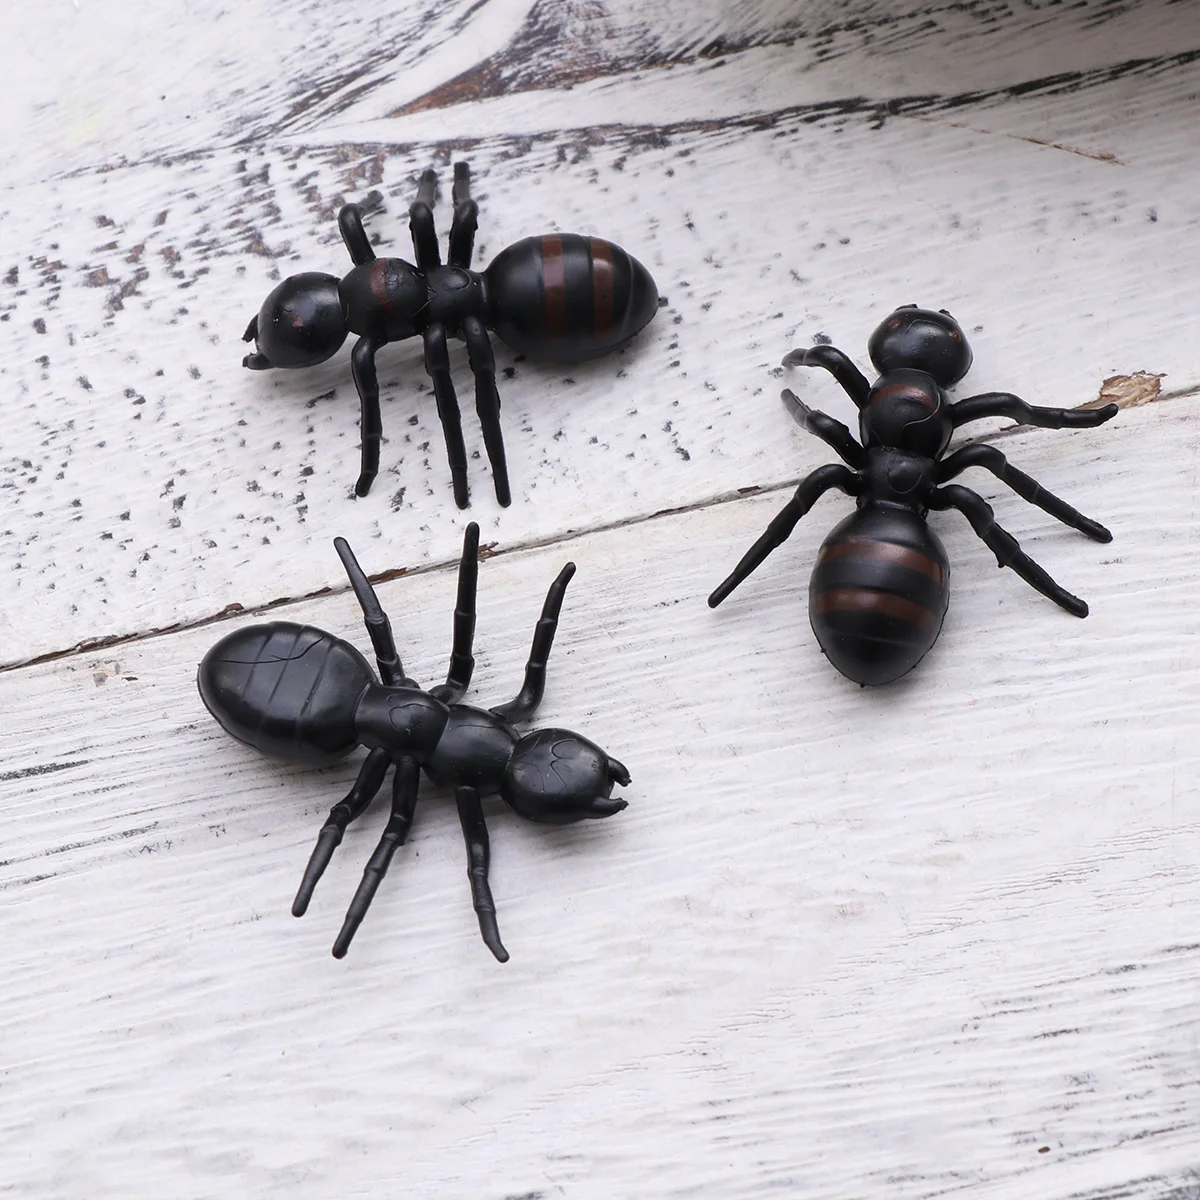 

50 PC Scary Toy Toys Children Plastic Black Ant Cupcake Decorating Bulk Faux Toy Animals Figurines